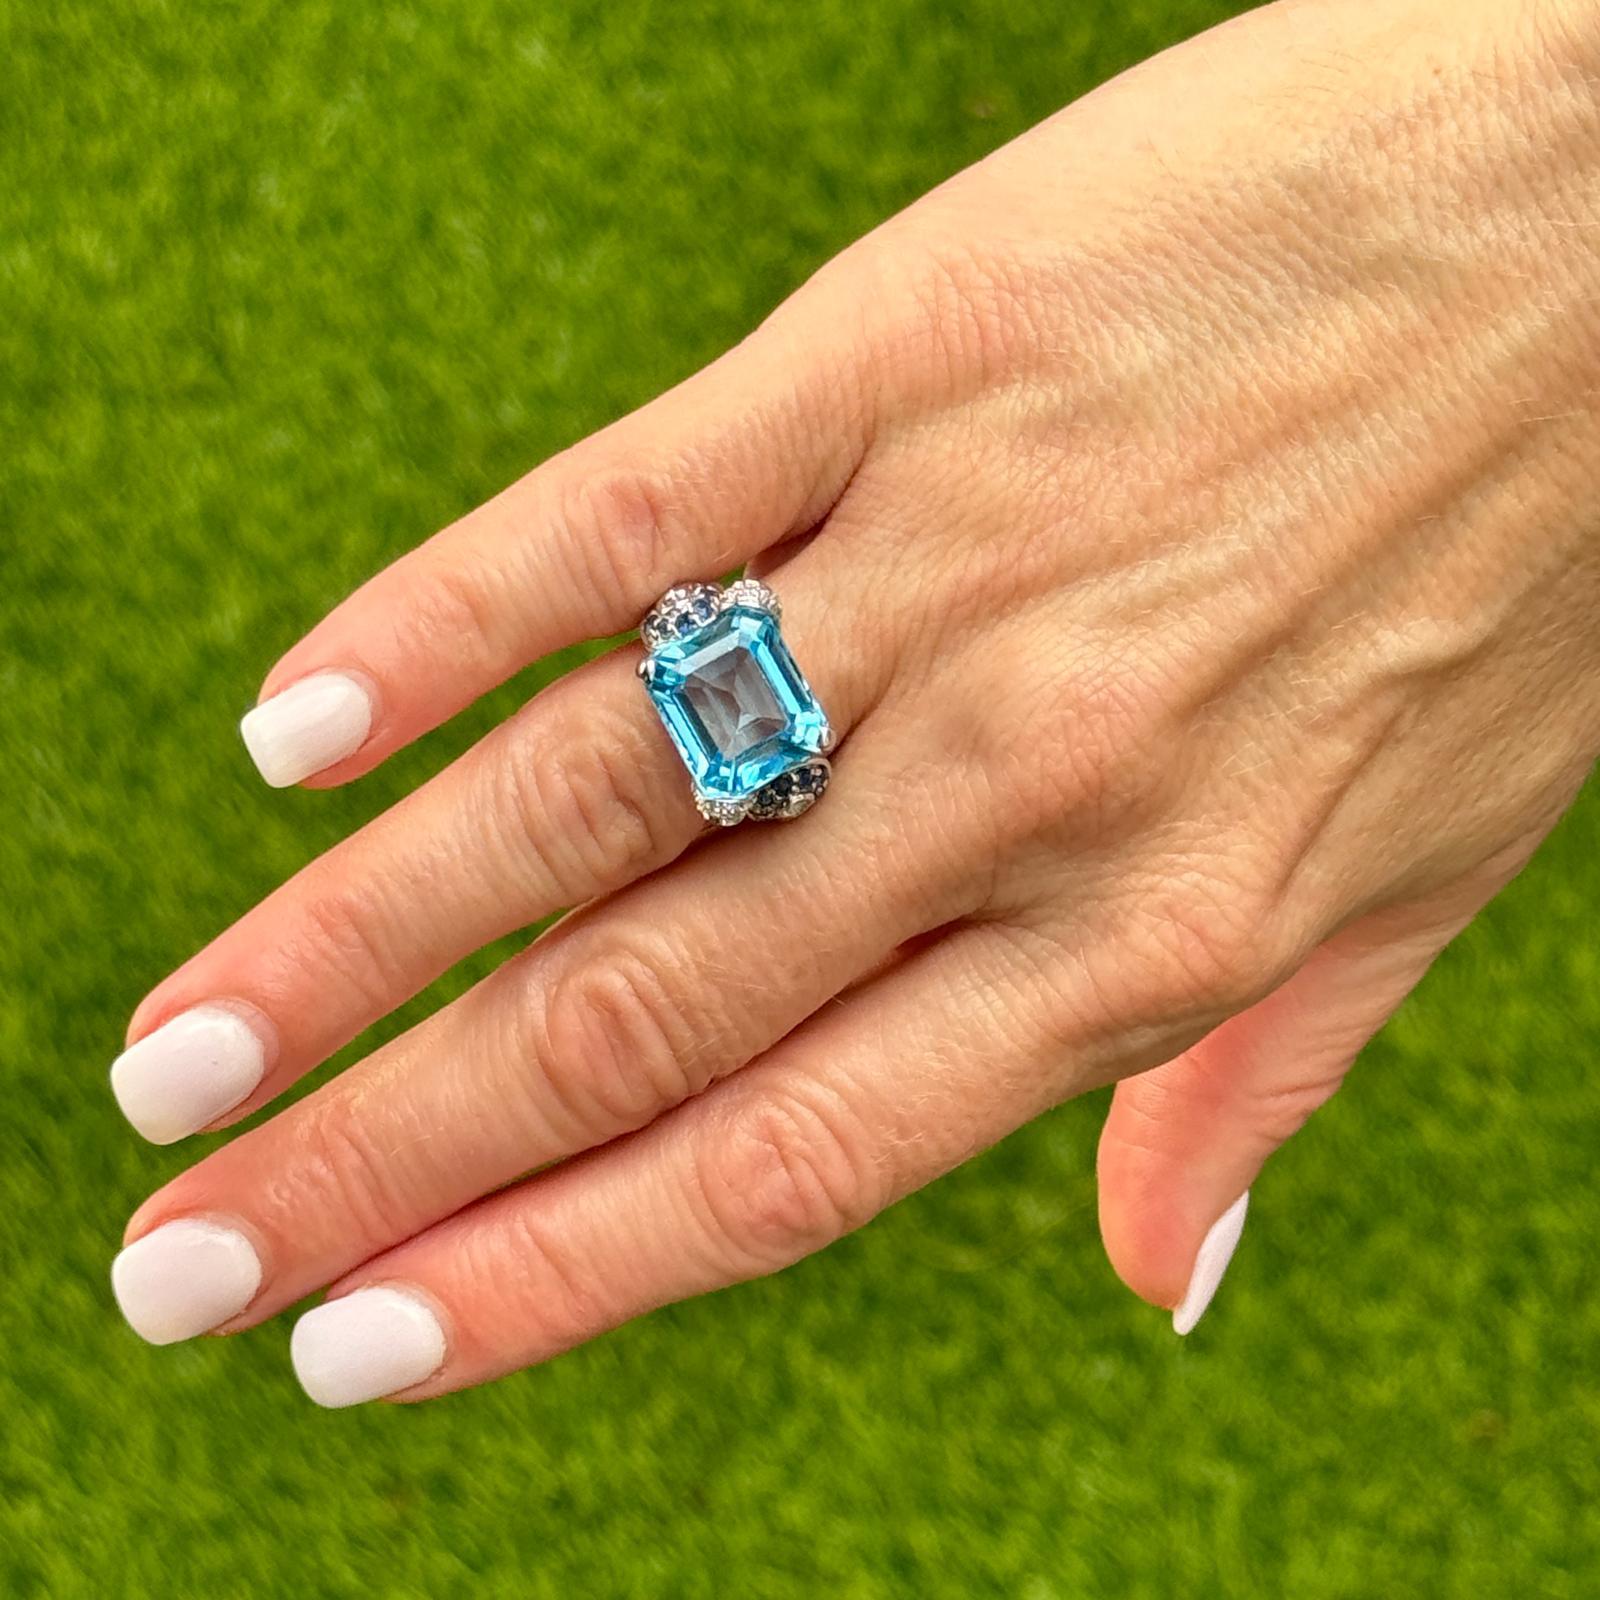 Modern blue topaz, sapphire, and diamond ring crafted in 14 karat white gold. The ring features an emerald cut blue topaz weighing approximately approximately 8.0 carats. The topaz is set east-west and the mounting is set with blue sapphire and